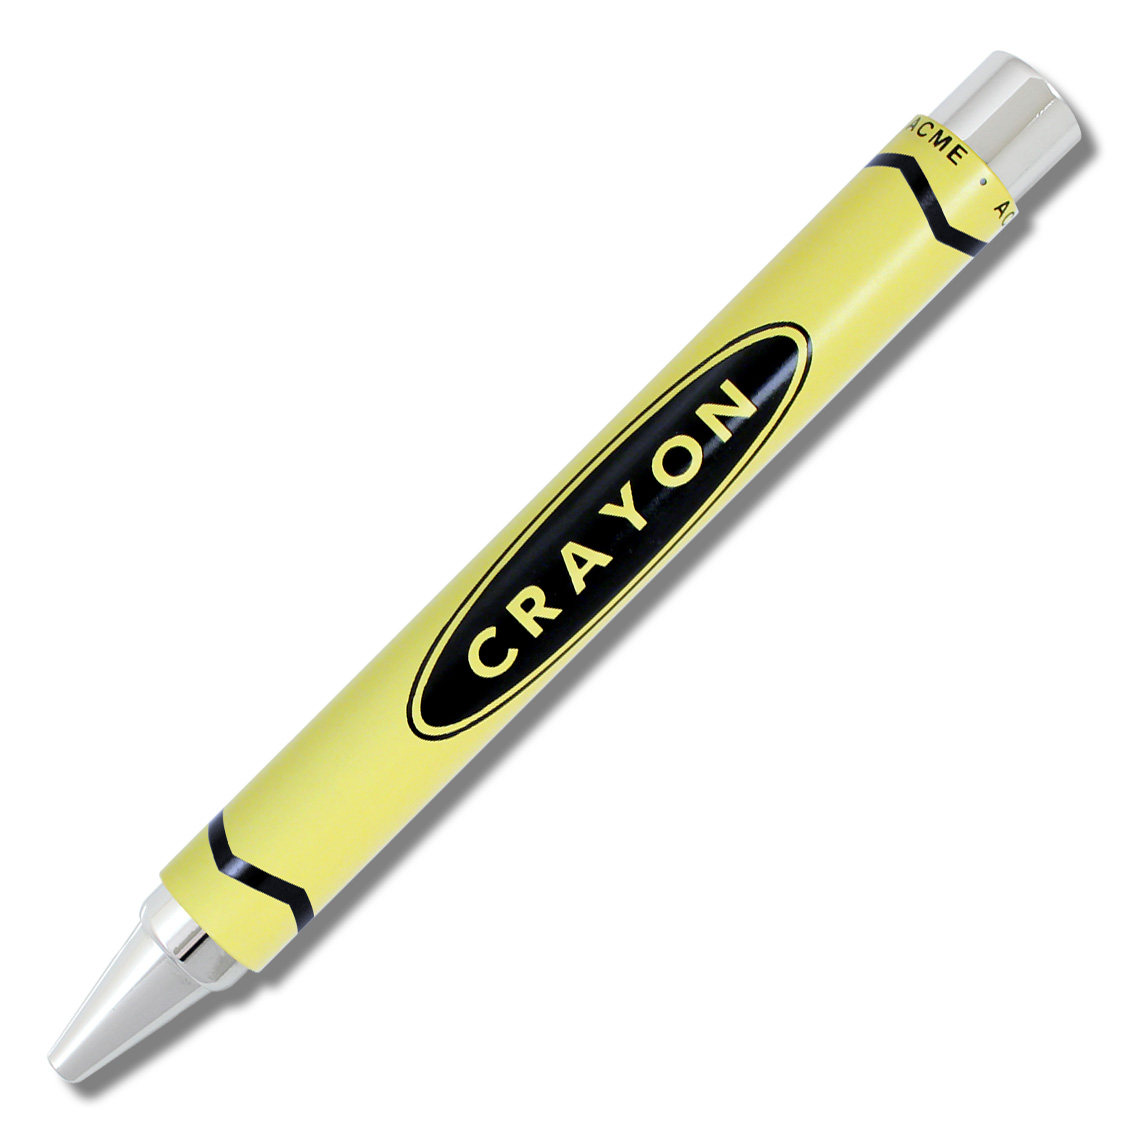 https://acmestudio.com/images/products/Olabuenaga-CRAYON-YELLOW-LIMITED-Retractable-Roller-products-writing-tools-crayon-01.jpg